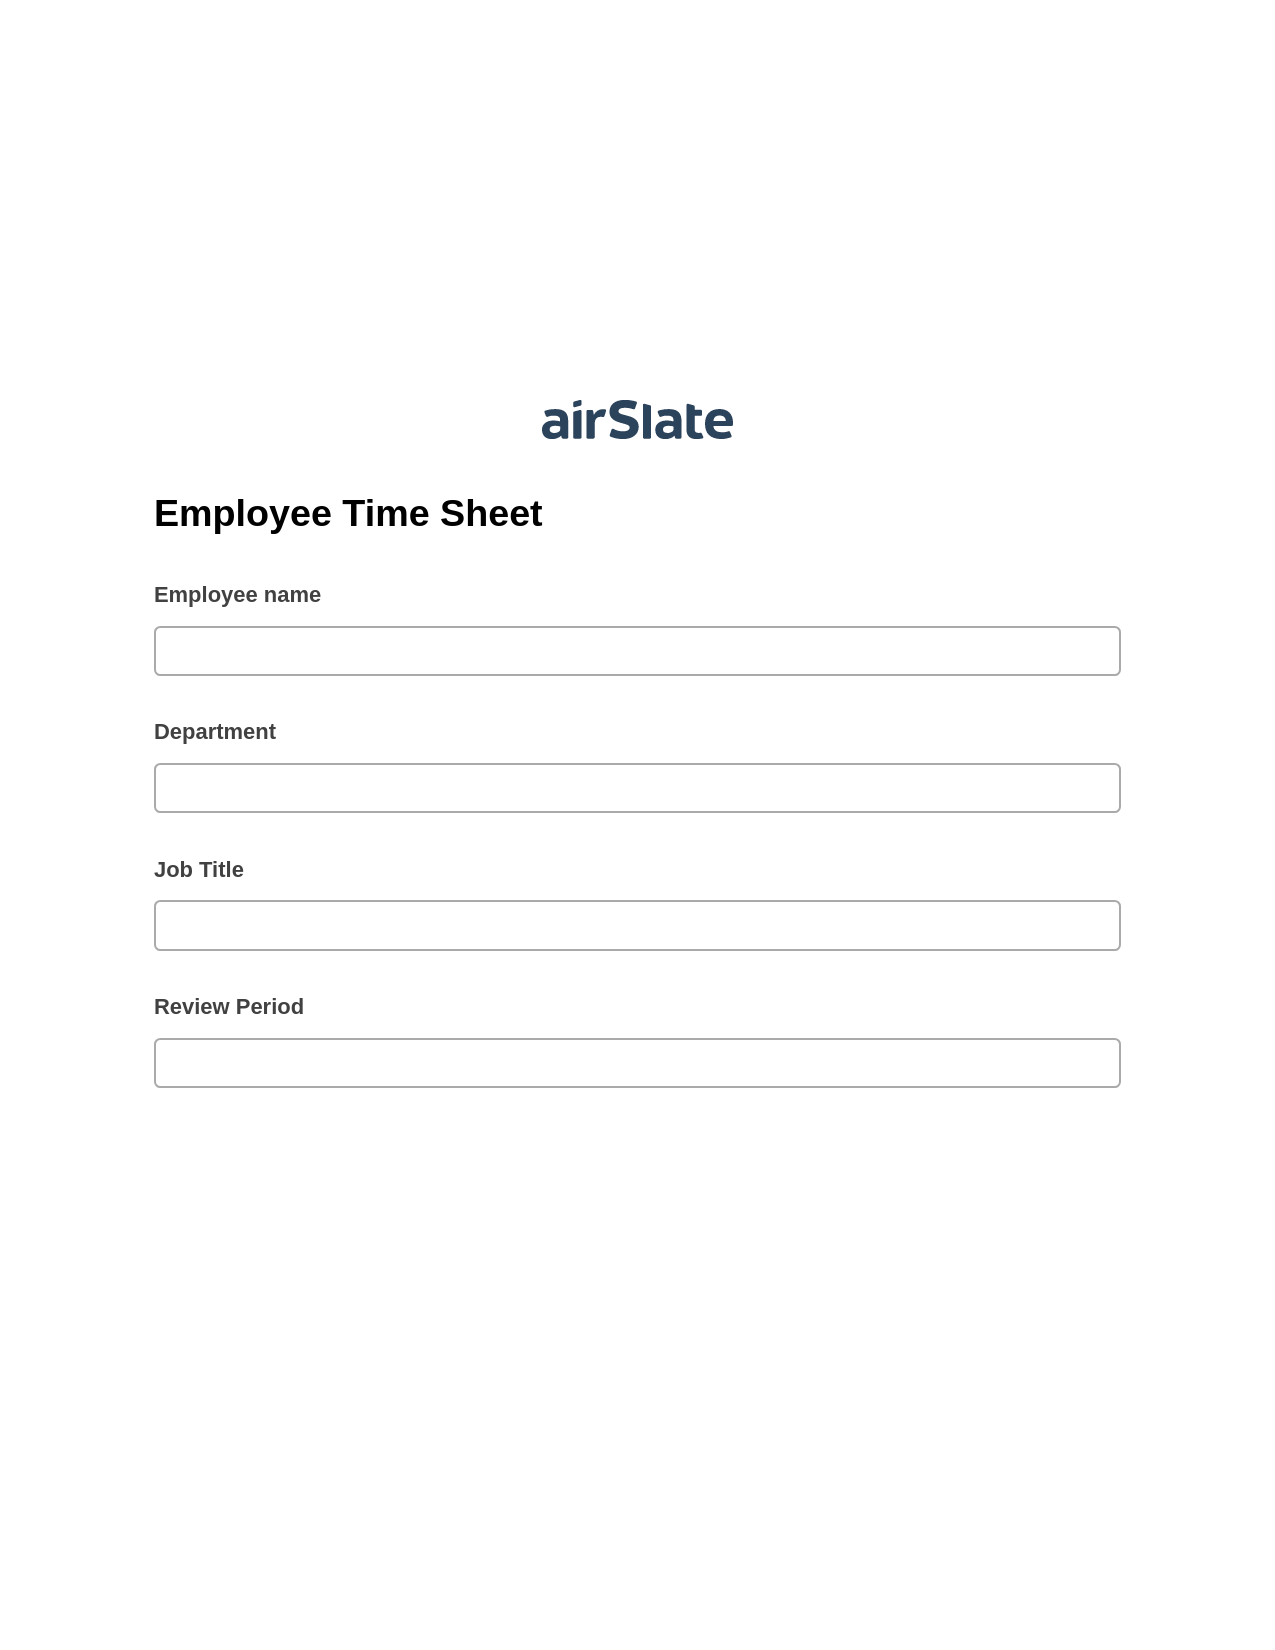 Employee Time Sheet Pre-fill Document Bot, Lock the Slate Bot, Archive to Box Bot